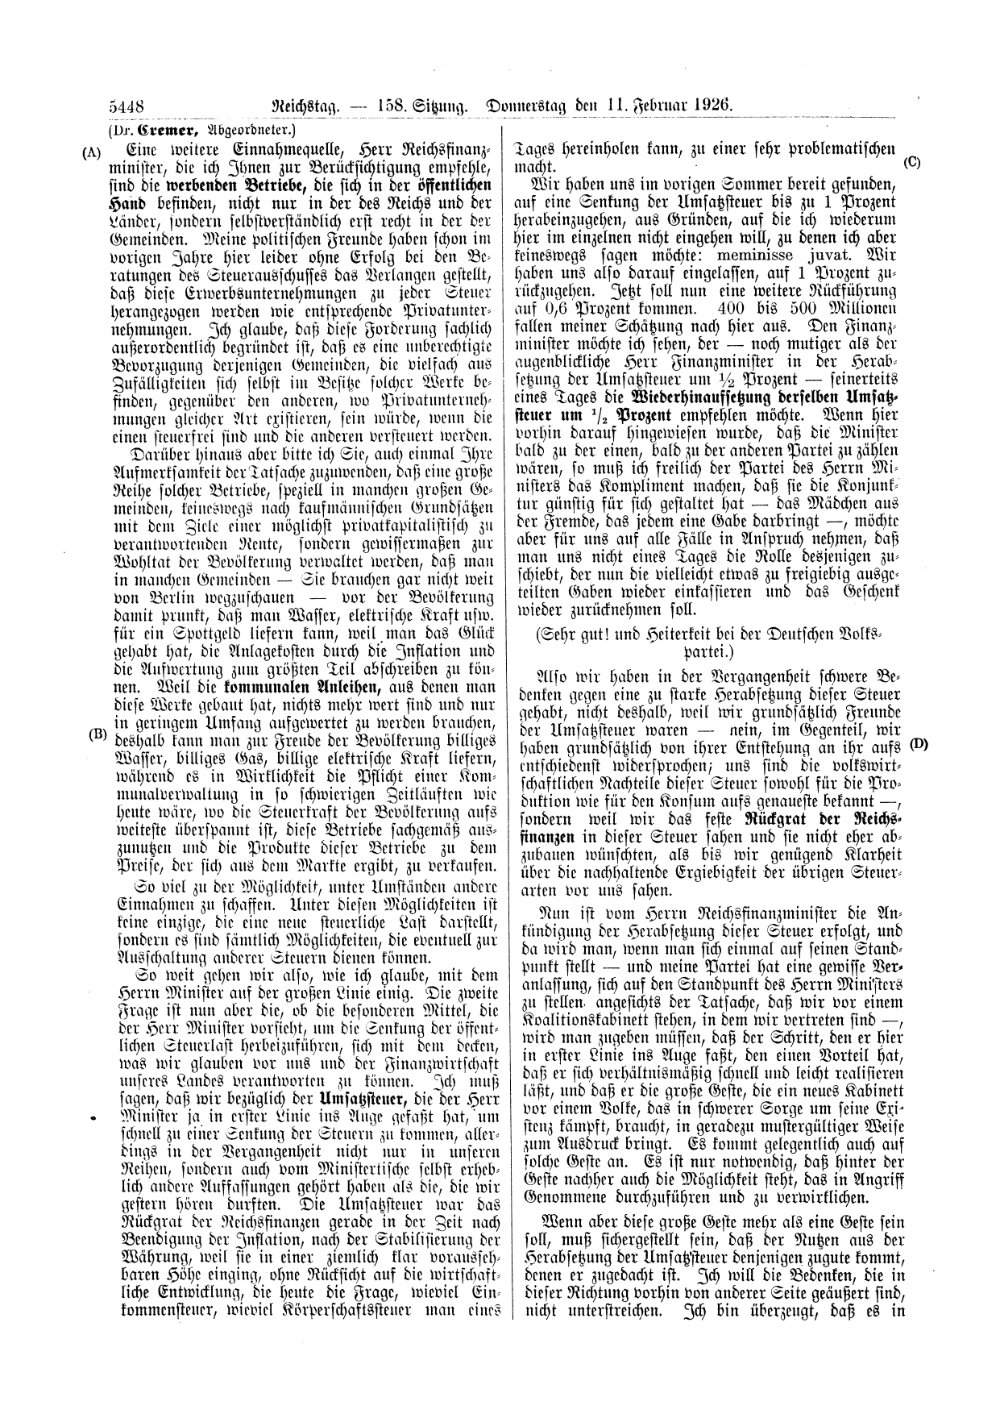 Scan of page 5448